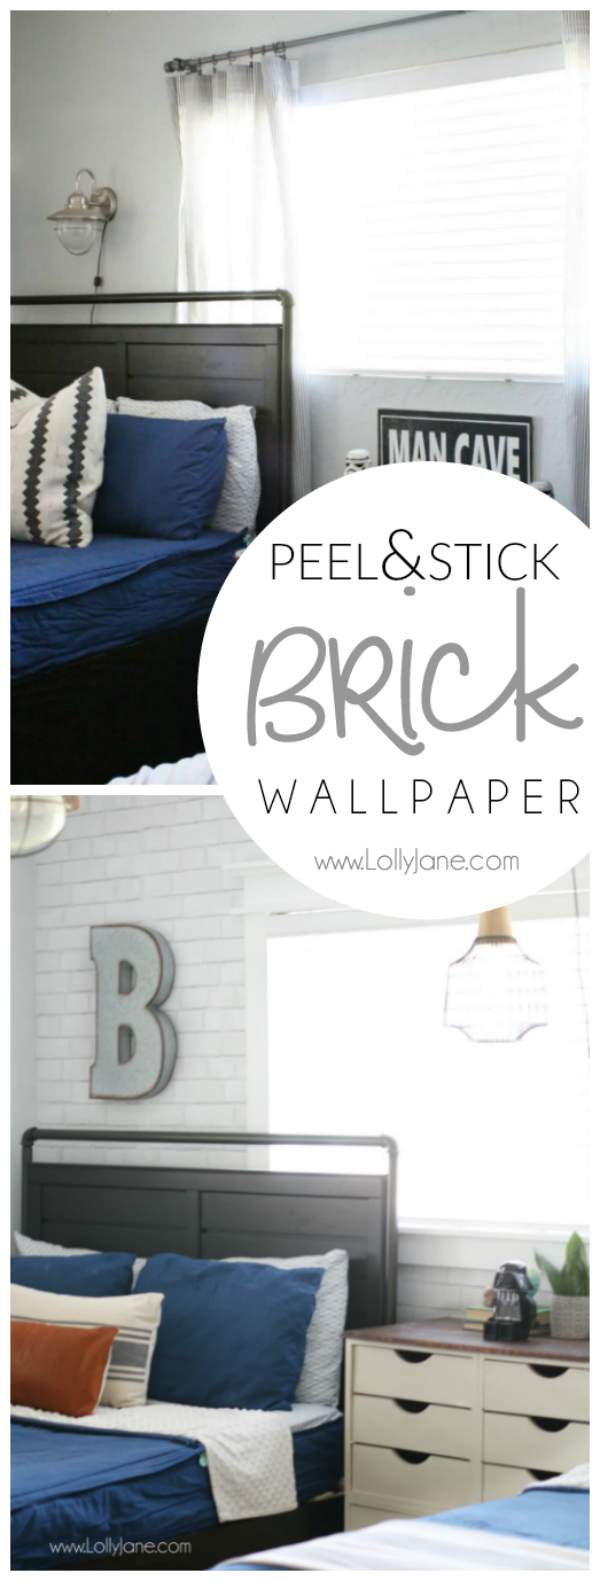 Peel and stick brick wallpaper makeover, such a fun accent wall! Love this affordable accent wall decor idea using removable wallpaper. #peelandstick #wallpaper #wallpapertutorial #diywallpaper #accentwall